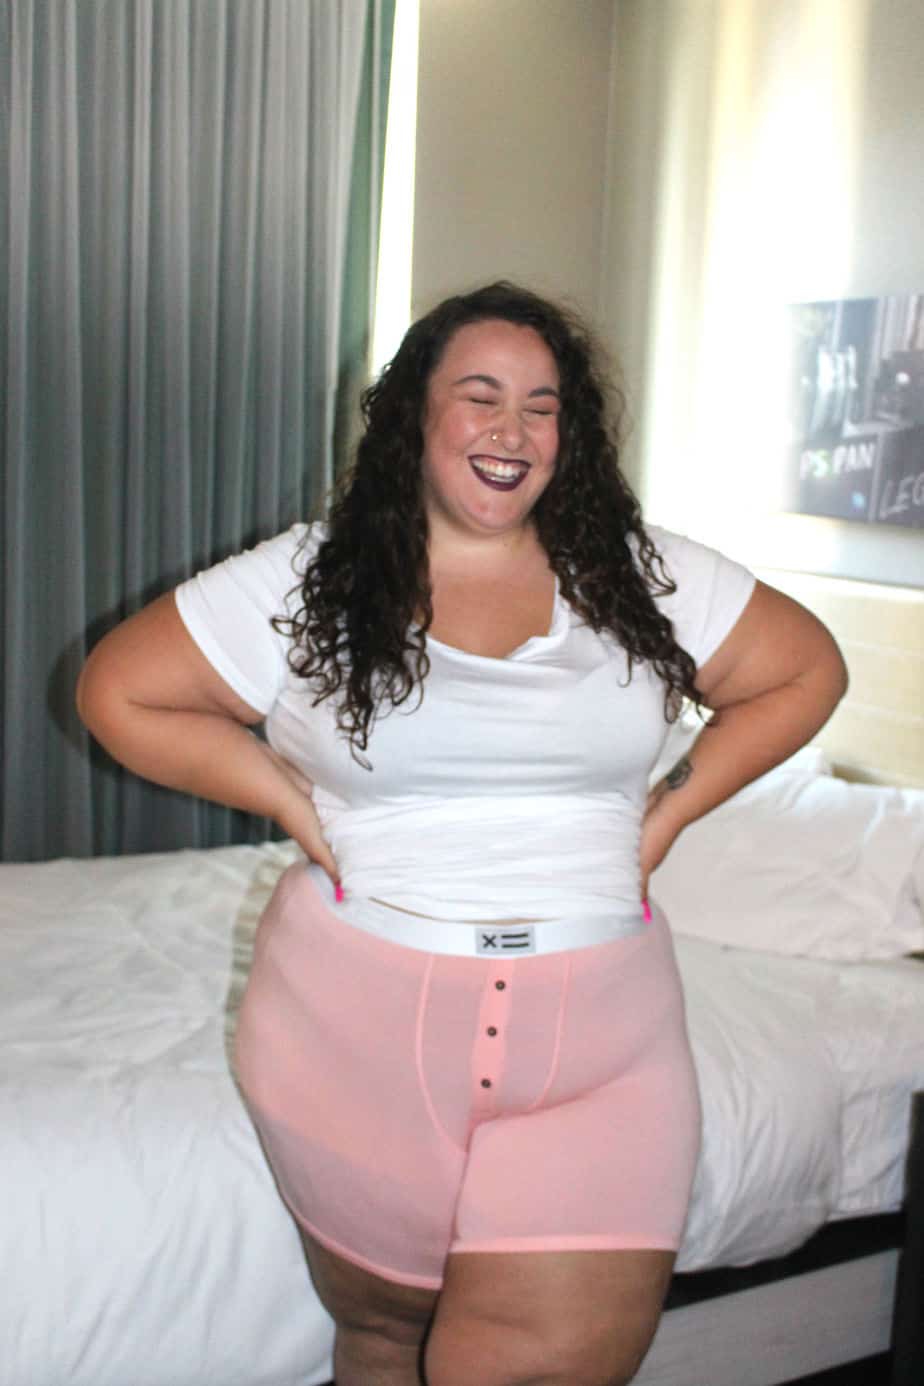 Androgynous Underwear Review: Play Out Boxer Briefs in Plus Sizes